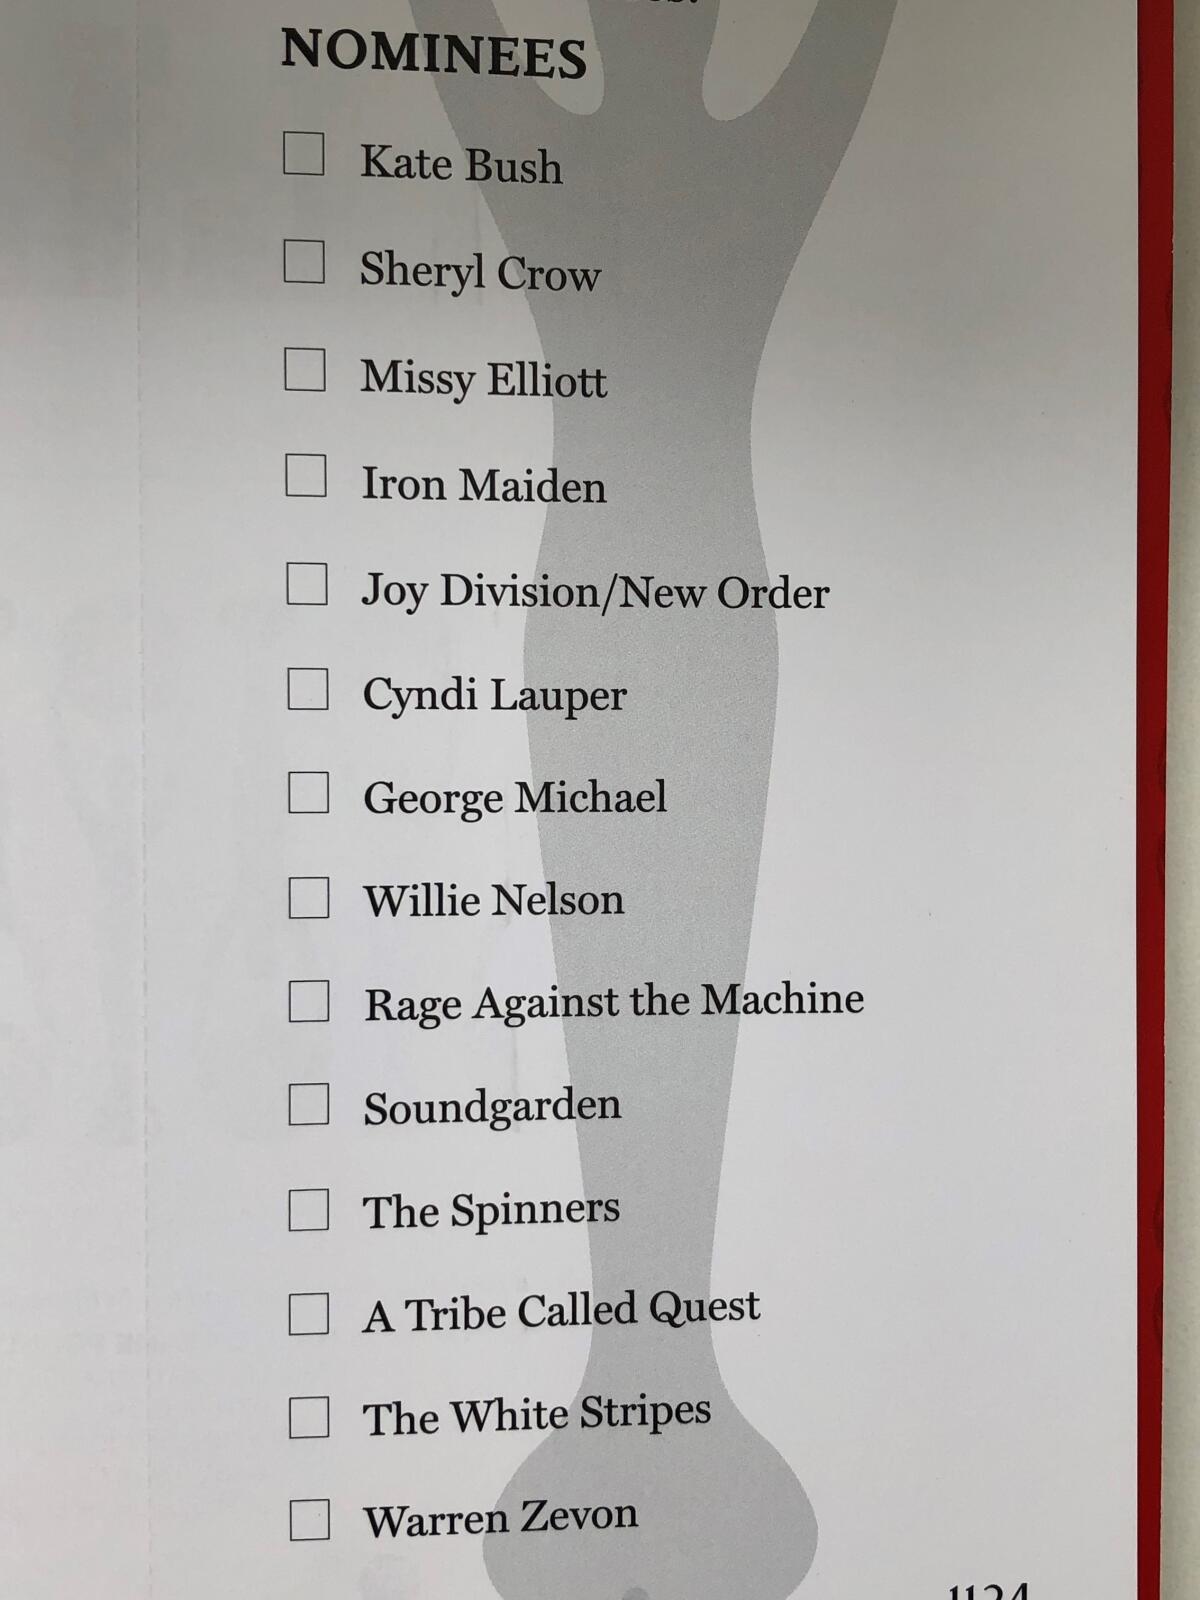 Rock & Roll Hall of Fame Who would you vote for on this year's ballot